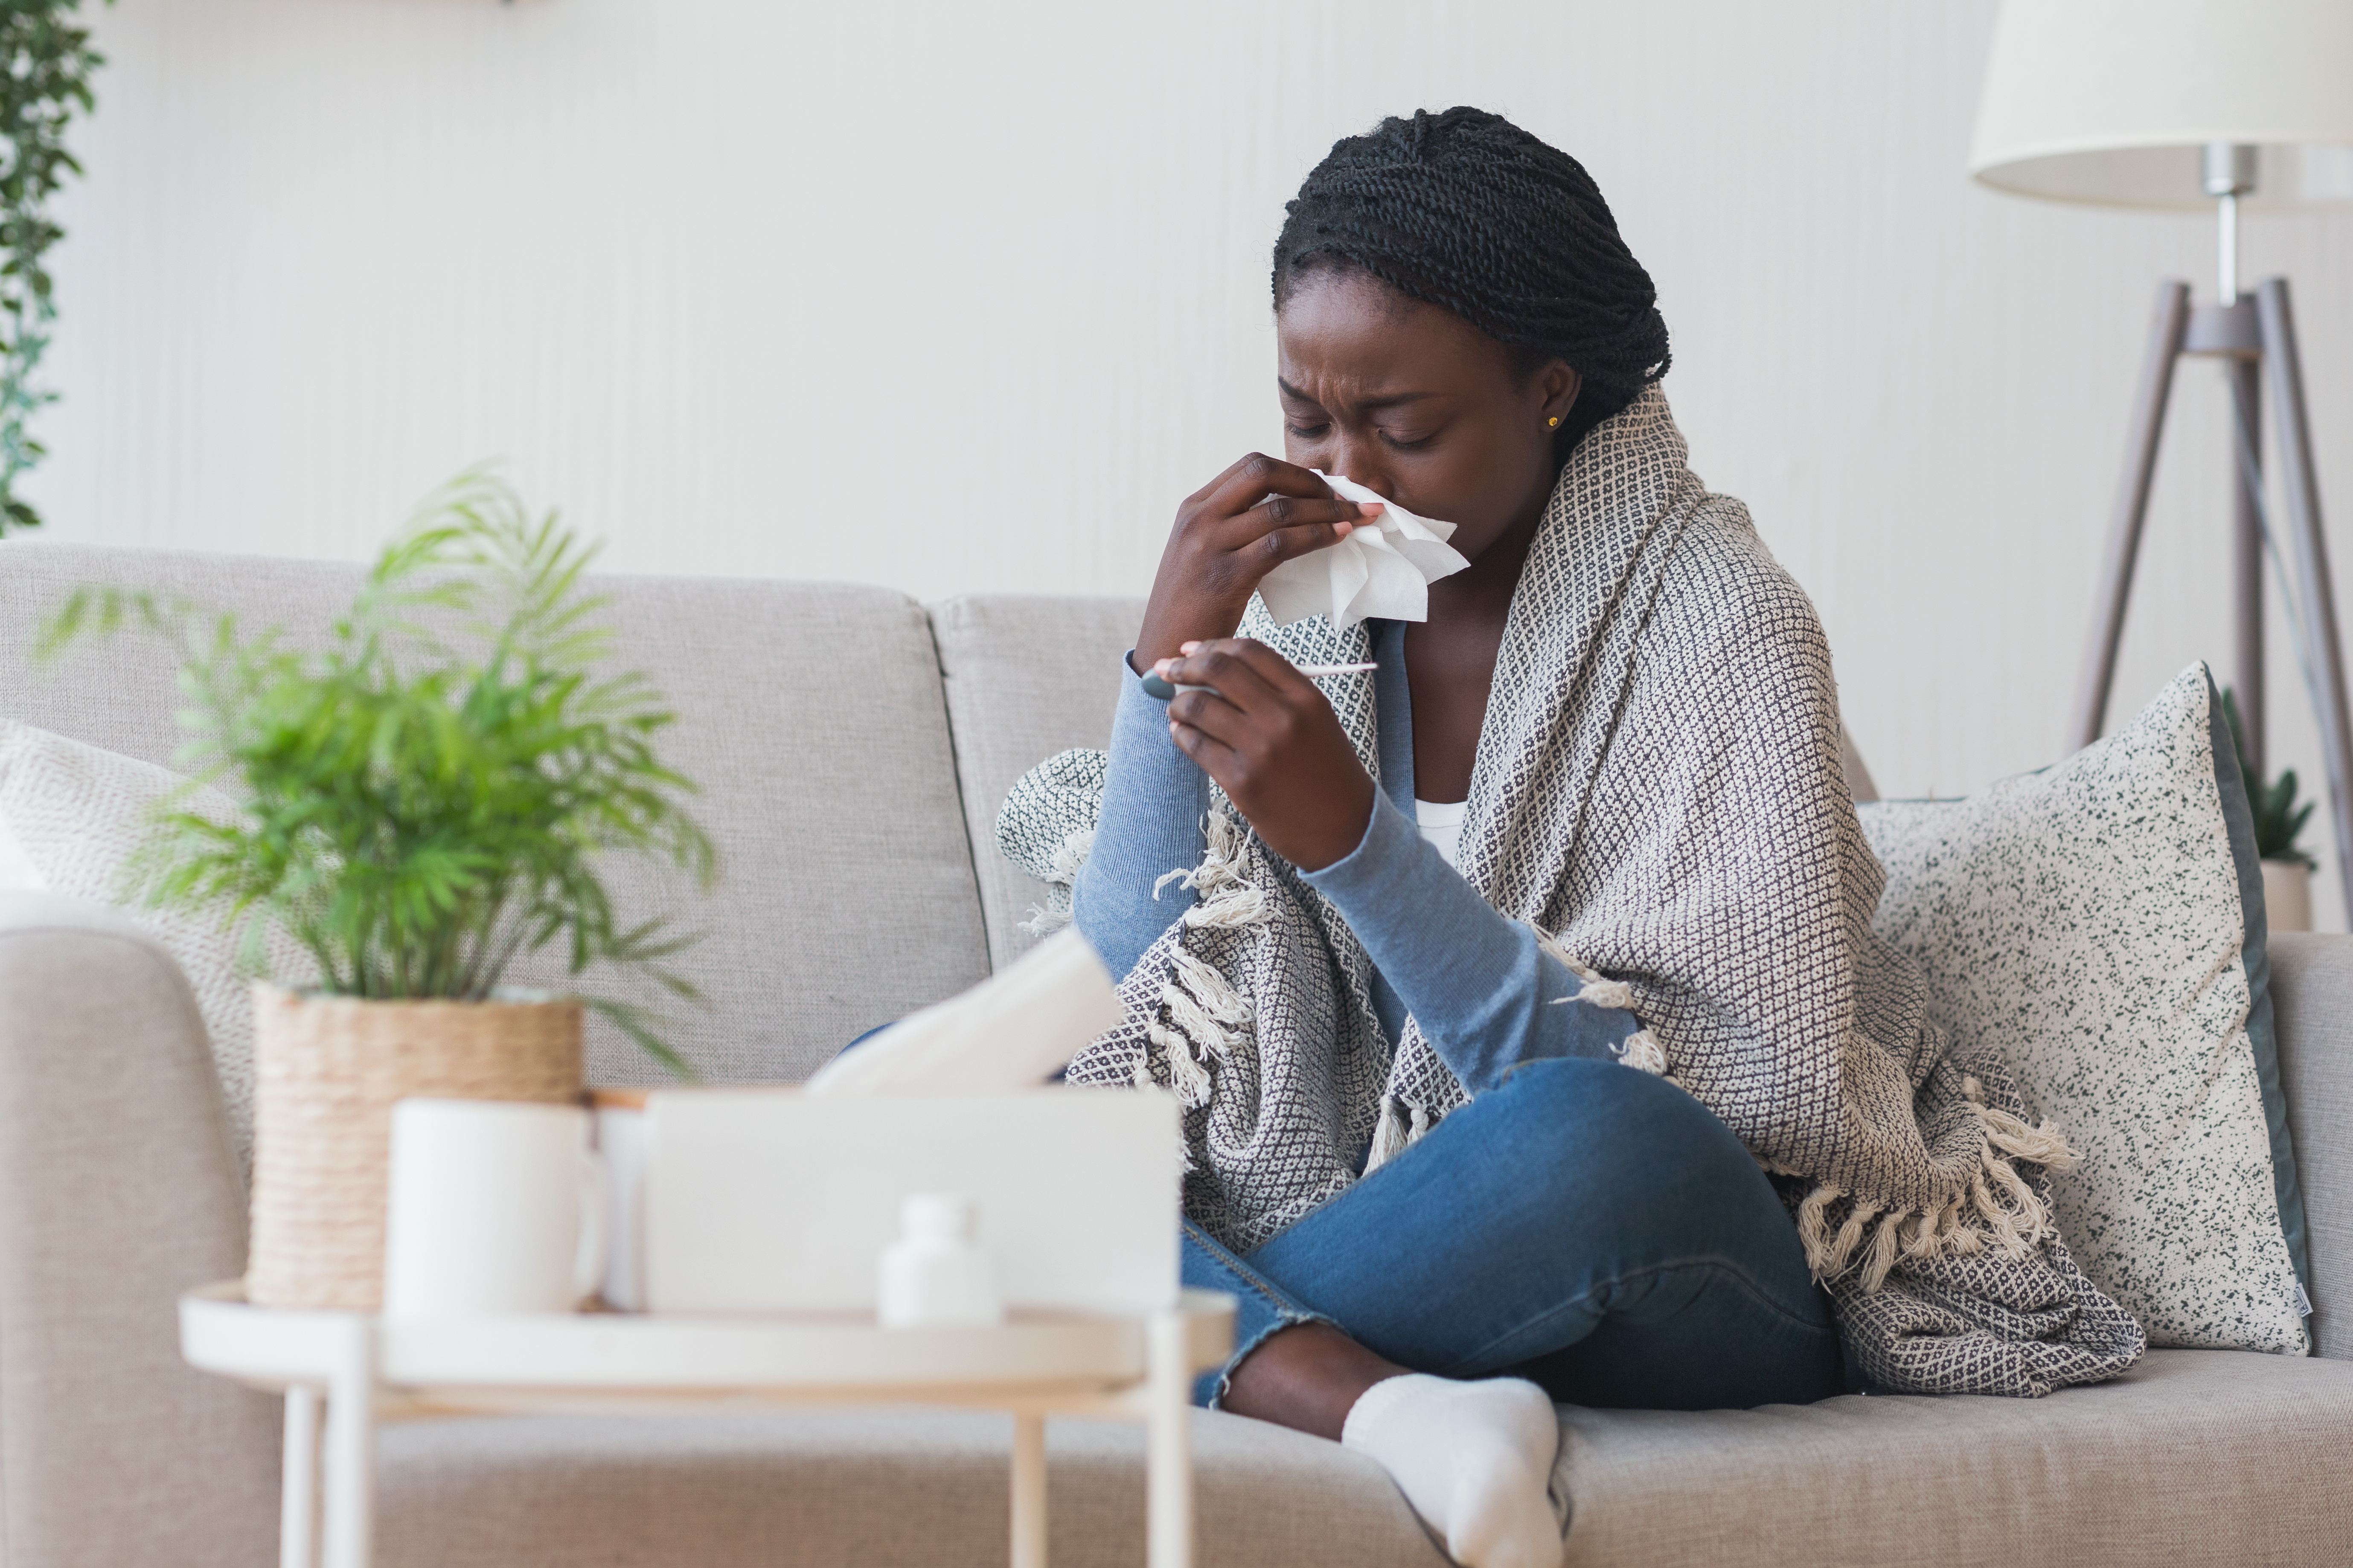 Woman on couch wiping nose with tissue and looking at thermometer.